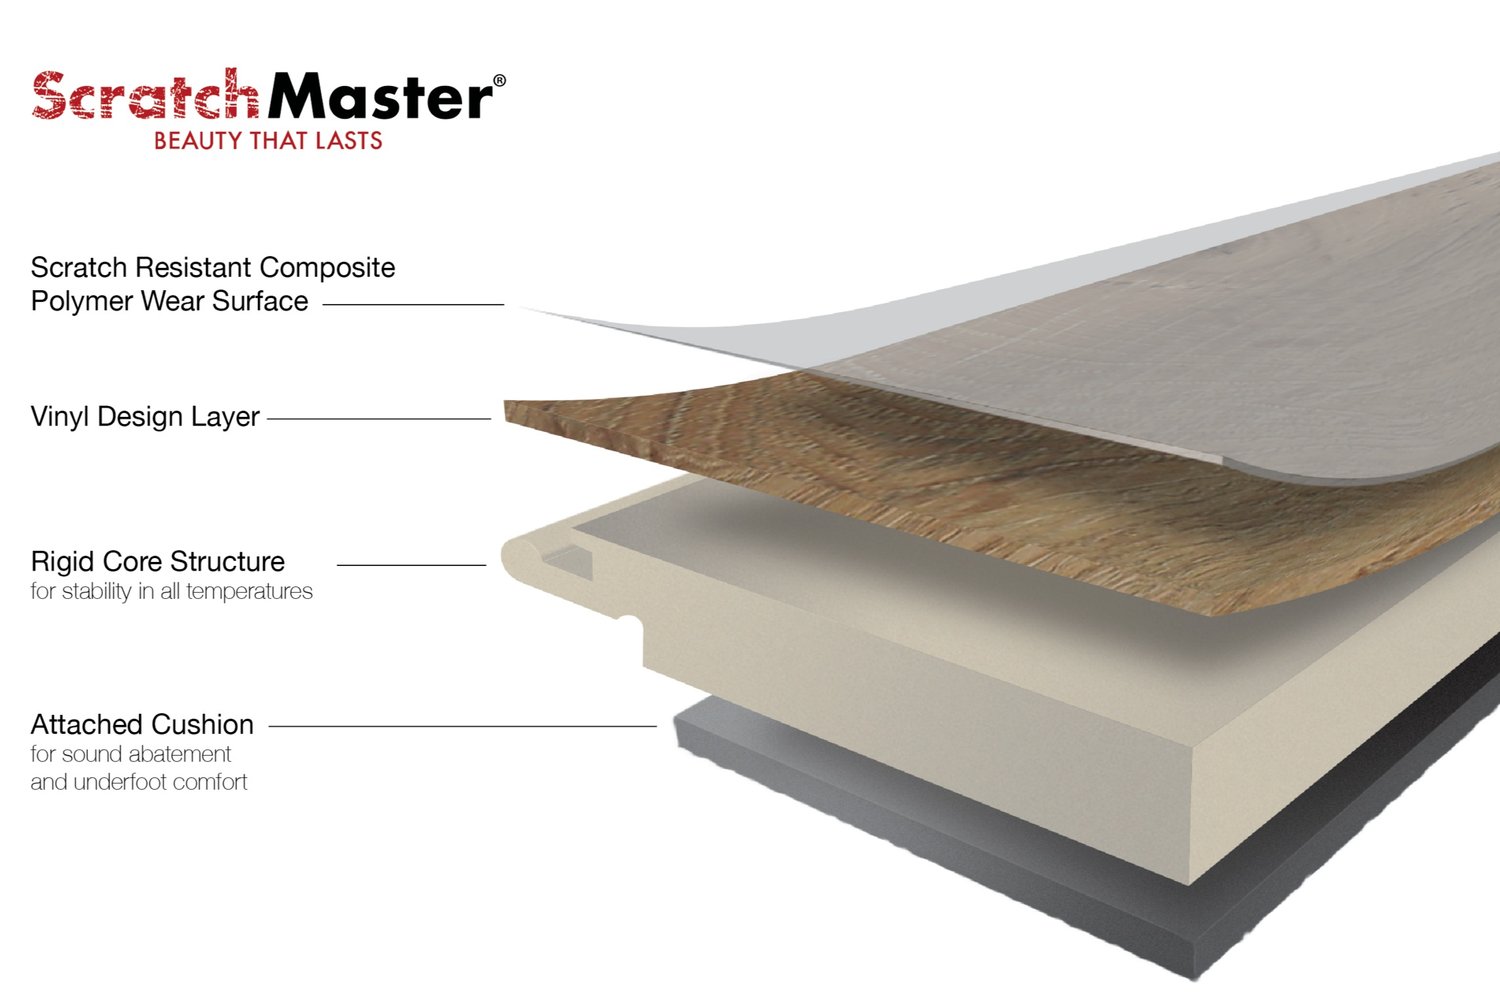 ScratchMaster layer construction. Layer 1: Scratch Resistant Composite Polymer Wear Surface. Layer 2: Vinyl Design Layer. Layer 3: Rigid Core Structure. Layer 4: Attached Cushion